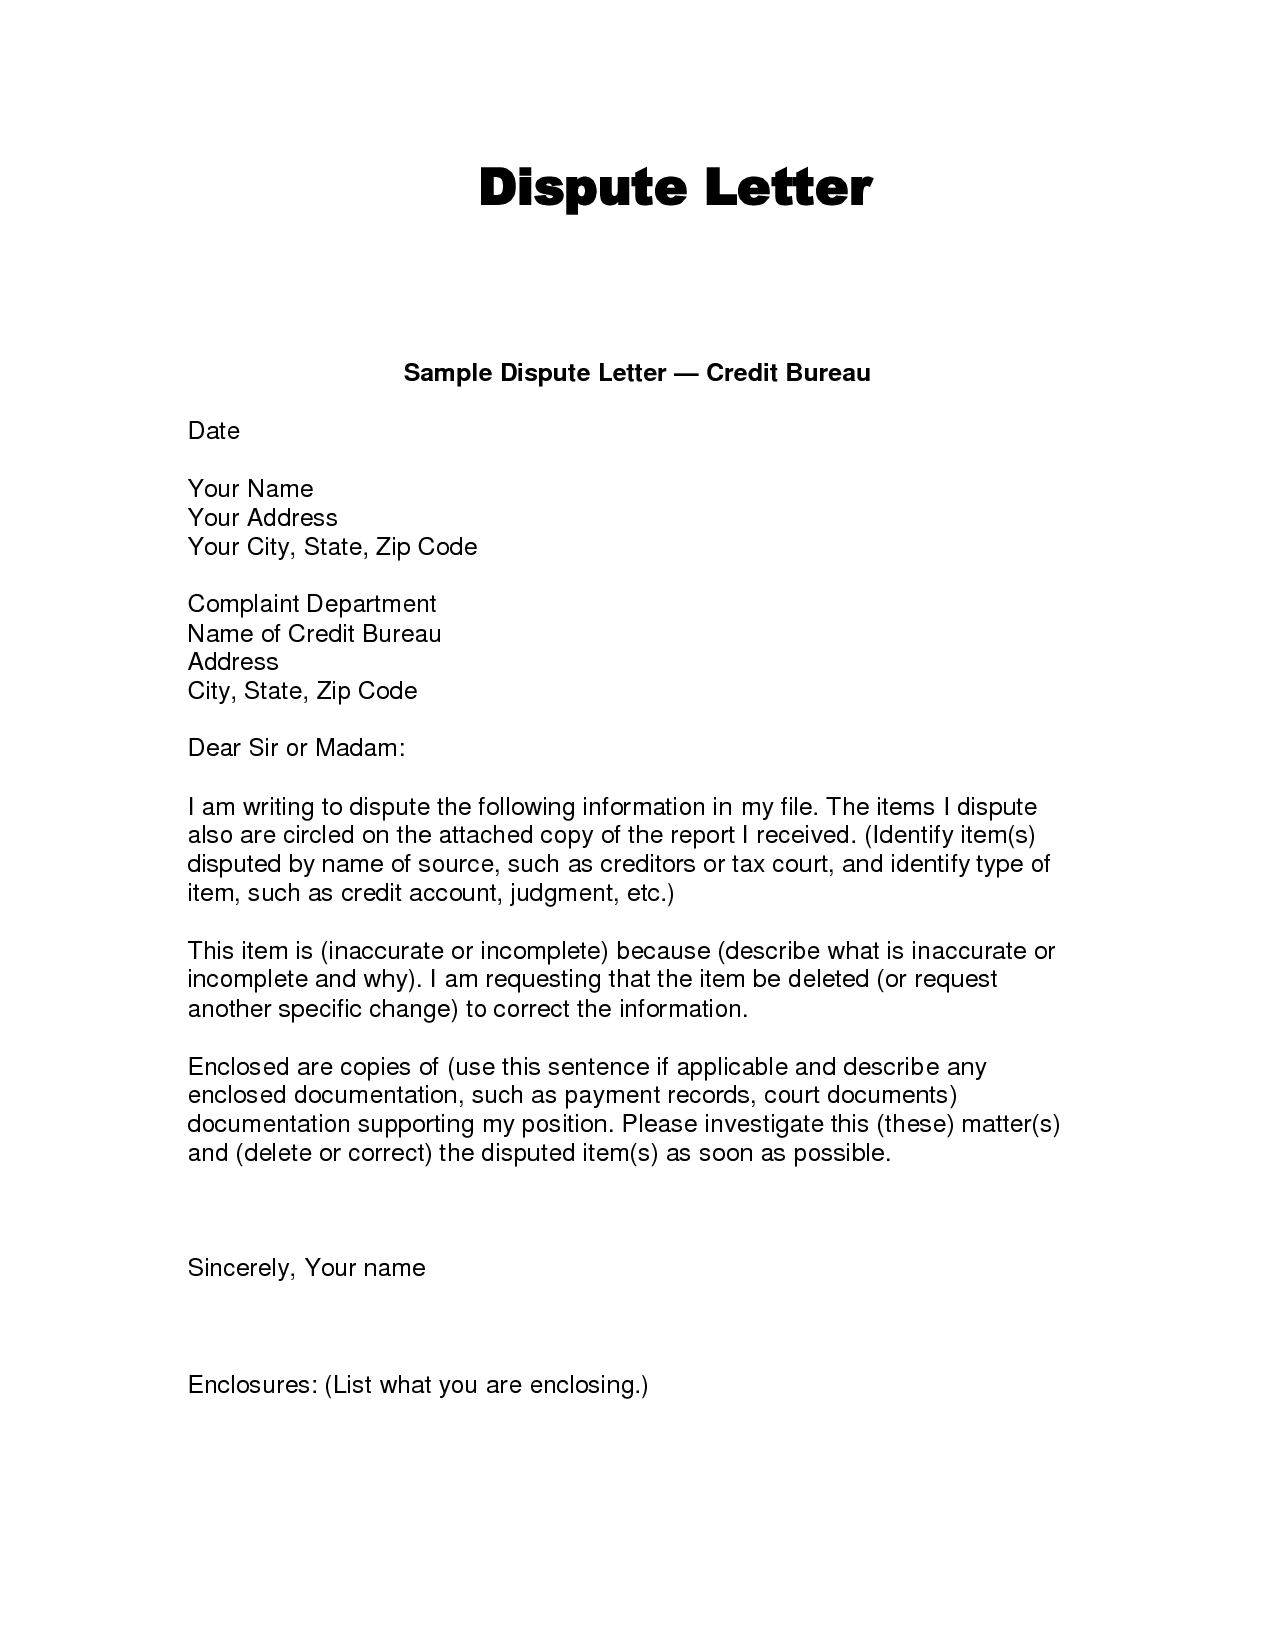 Writing Dispute Letter Format  Make A Habit   Credit Bureaus within Credit Dispute Letter Template